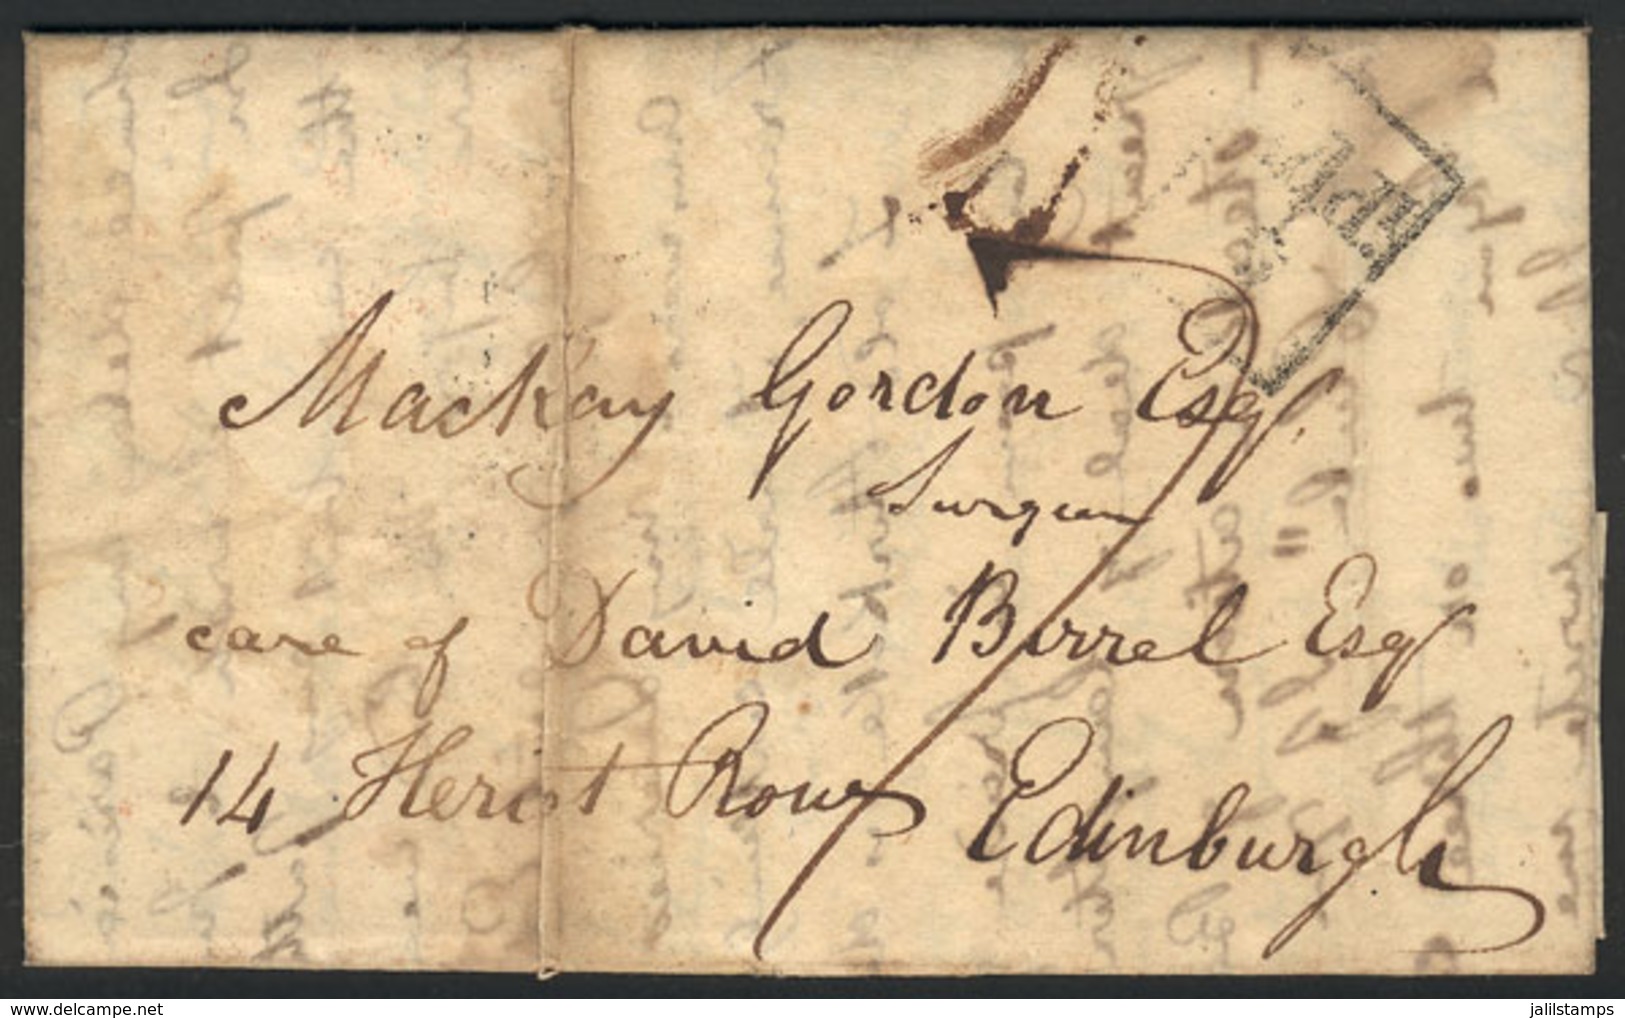 GREAT BRITAIN: Entire Letter Dated 13/OC/1823, From Glasgow To Edinburgh, With Interesting Postal Markings And A Long An - ...-1840 Prephilately